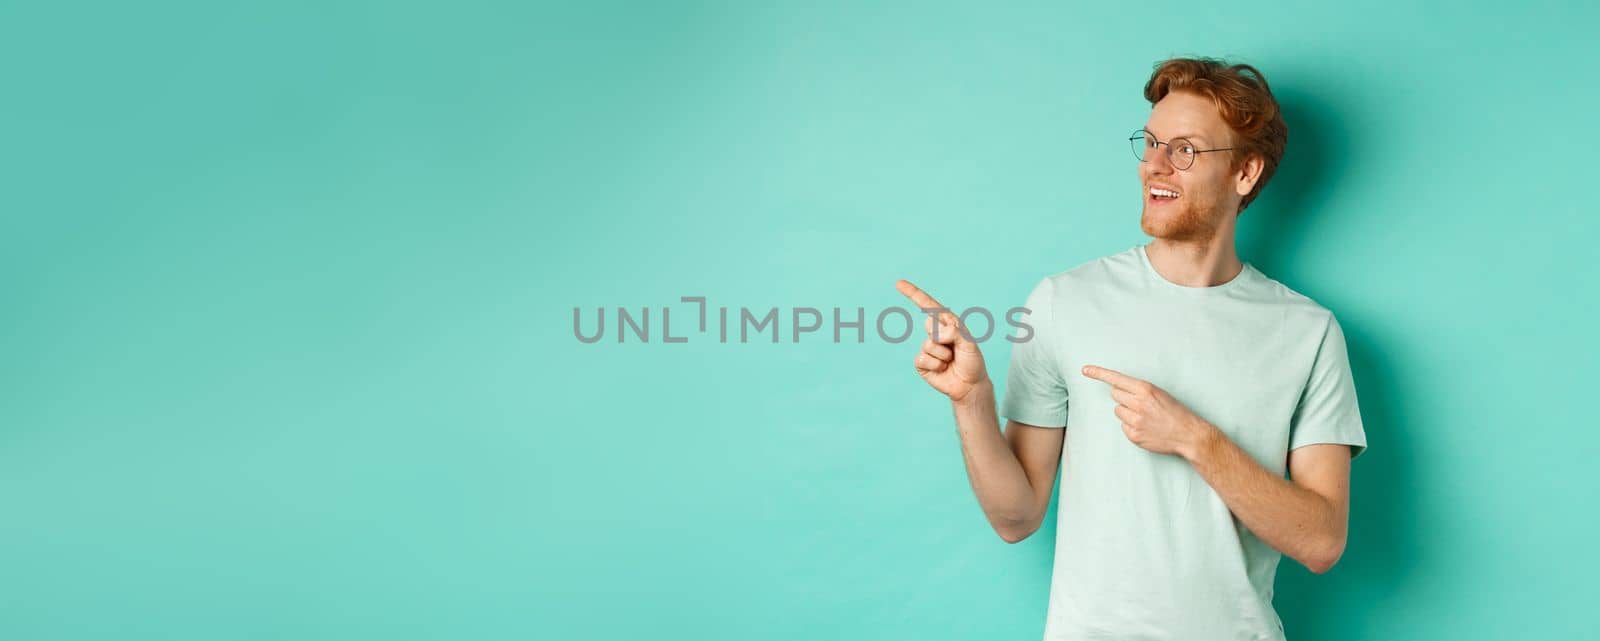 Handsome young man with red hair and beard, wearing glasses and t-shirt, pointing and looking left with amused face, checking out advertisement on copy space, mint background.